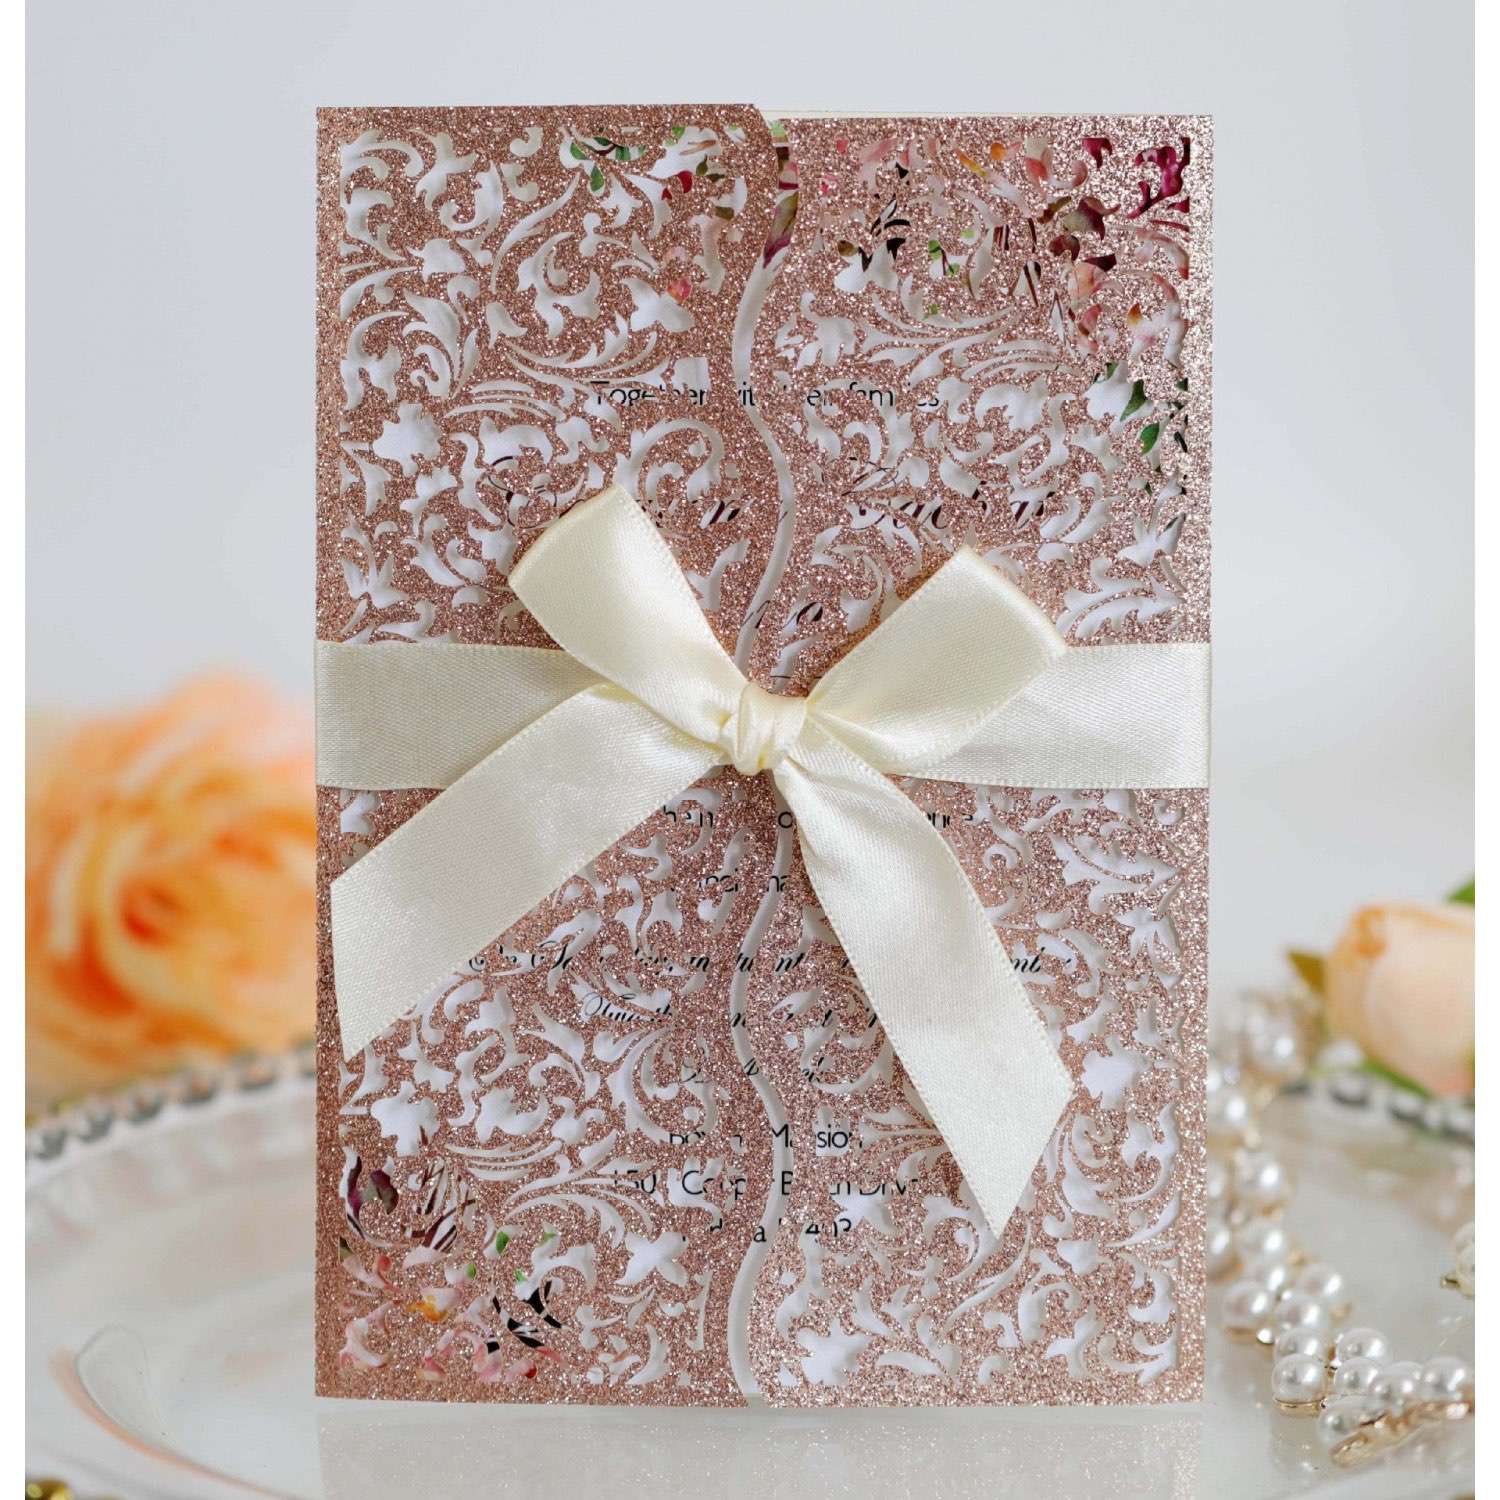 Marriage Invitation Card With Ribbon Bow Laser Cut Glitter Paper Wedding Supplies